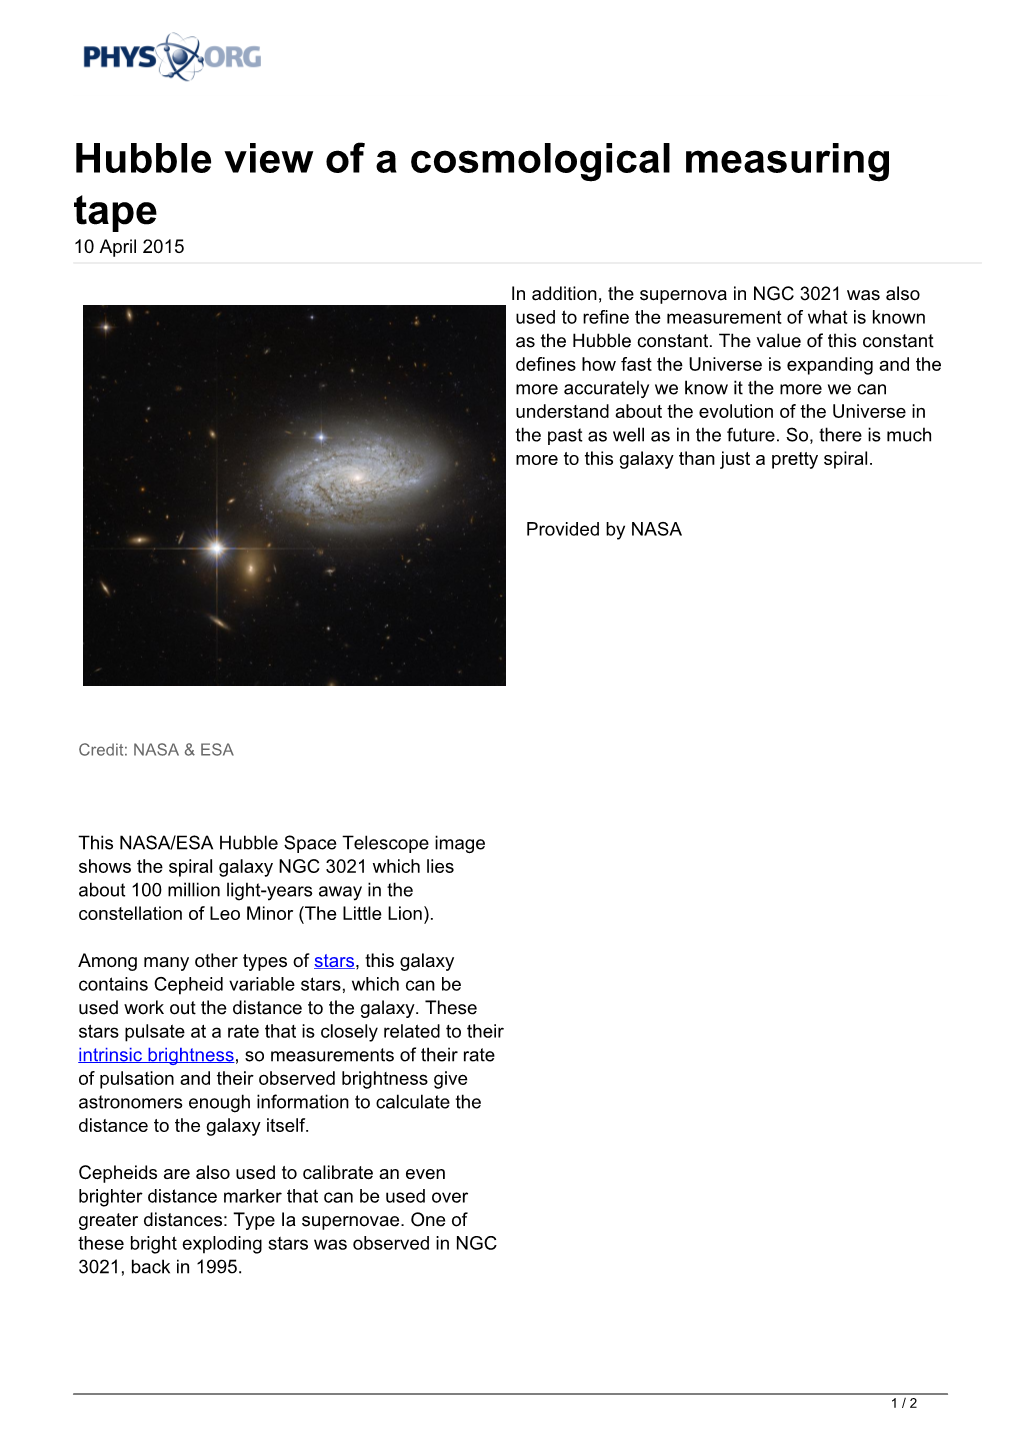 Hubble View of a Cosmological Measuring Tape 10 April 2015